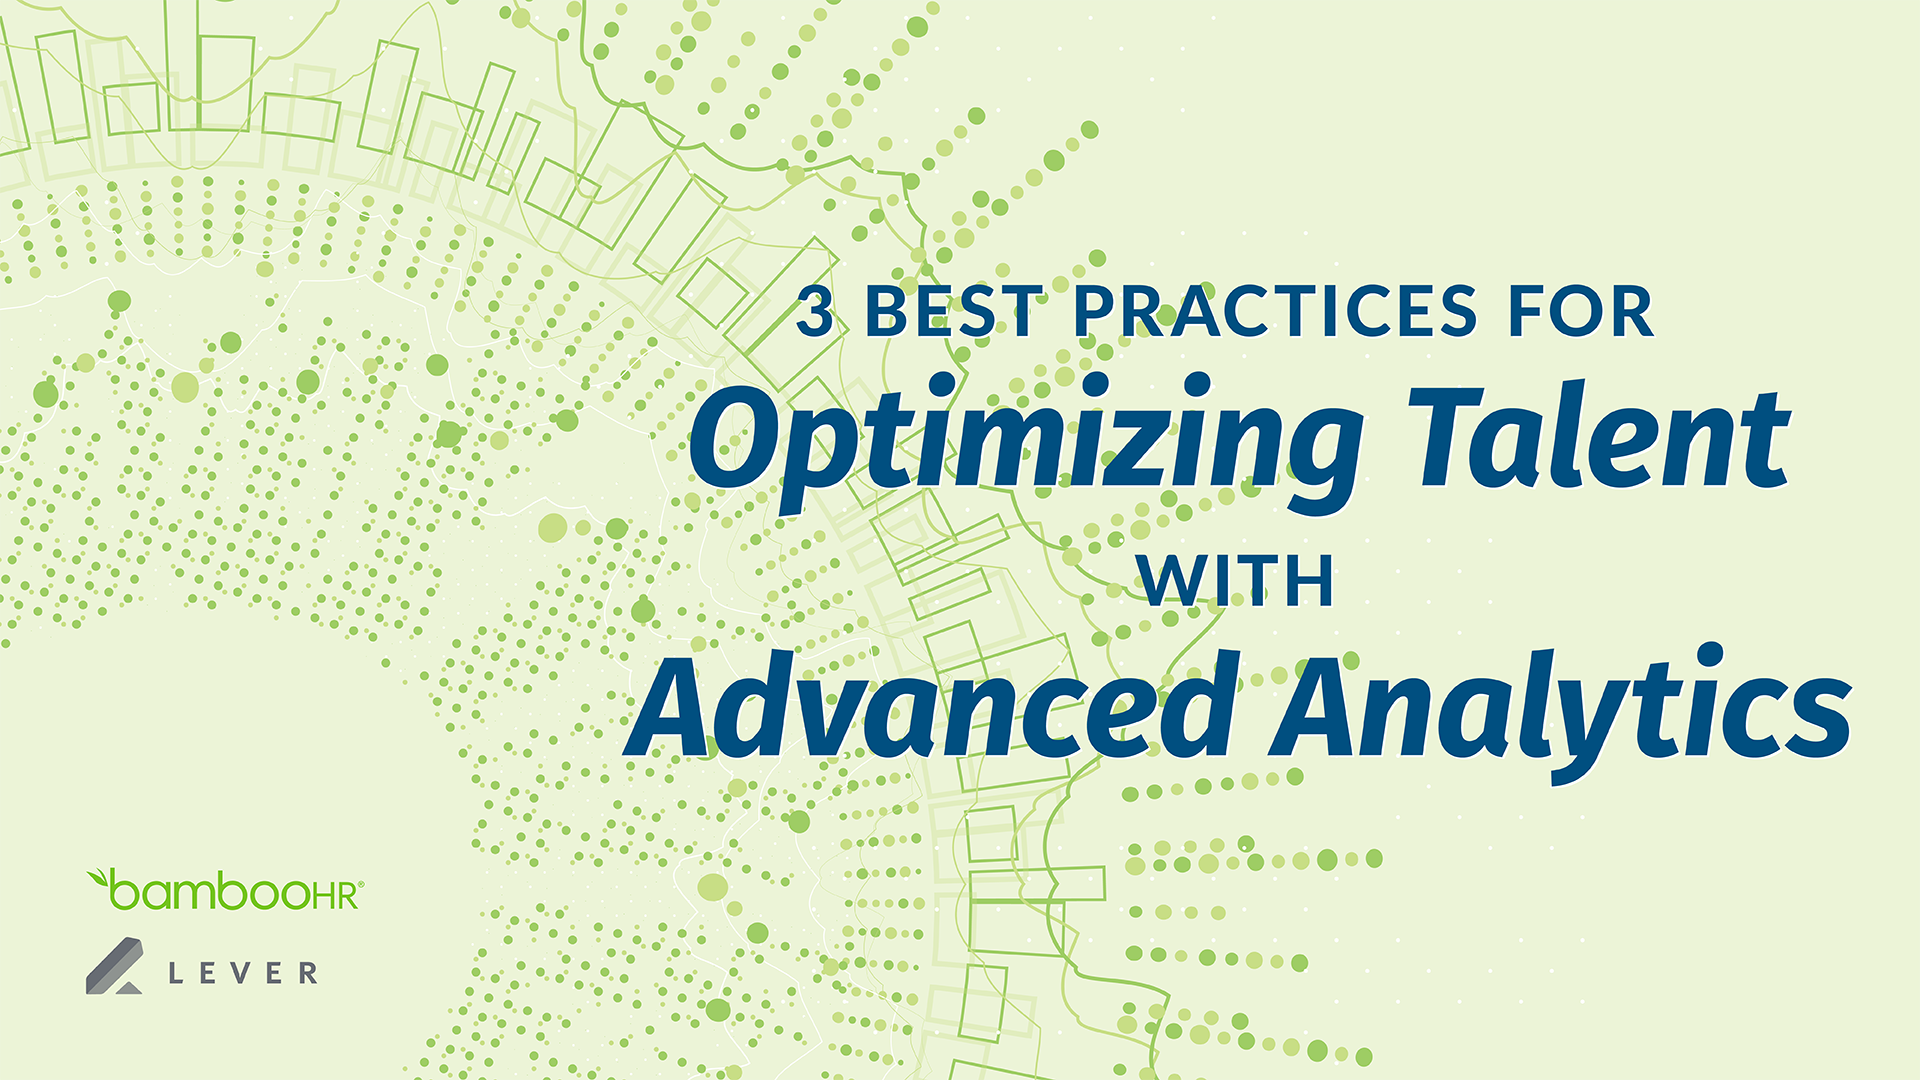 3 Best Practices for Optimizing Talent with Advanced Analytics